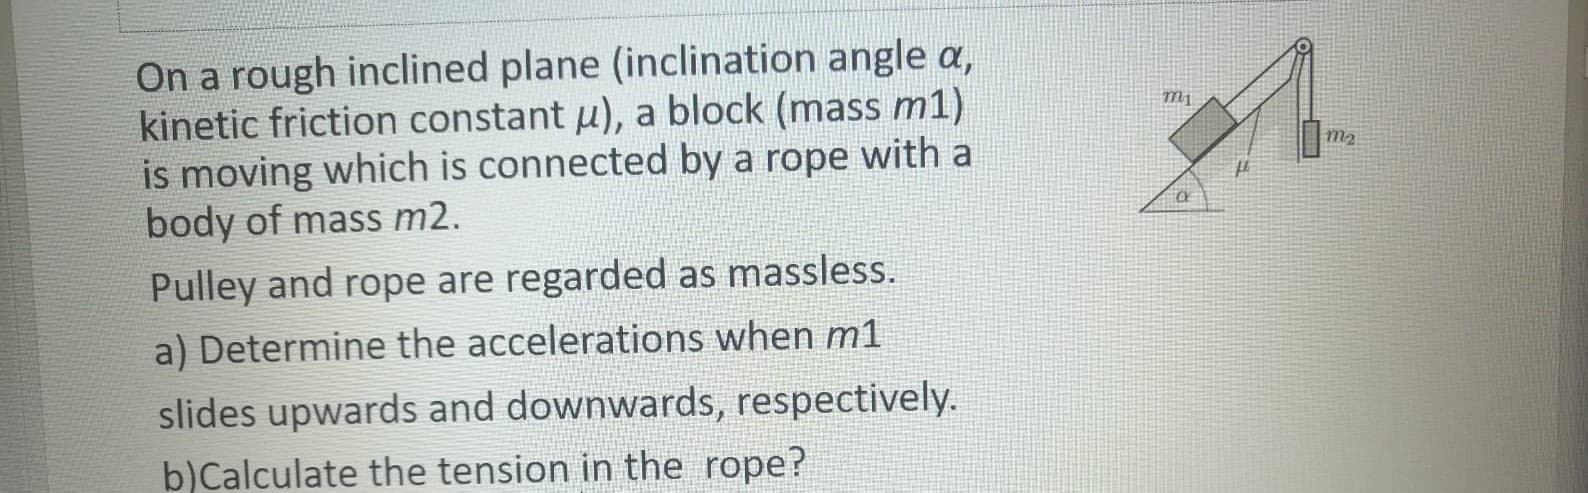 On a rough inclined plane (inclination angle a,
kinetic friction constant u), a block (mass m1)
is moving which is connected by a rope with a
body of mass m2.
Pulley and rope are regarded as massless.
a) Determine the accelerations when m1
slides upwards and downwards, respectively.
þ)Calculate the tension in the rope?
